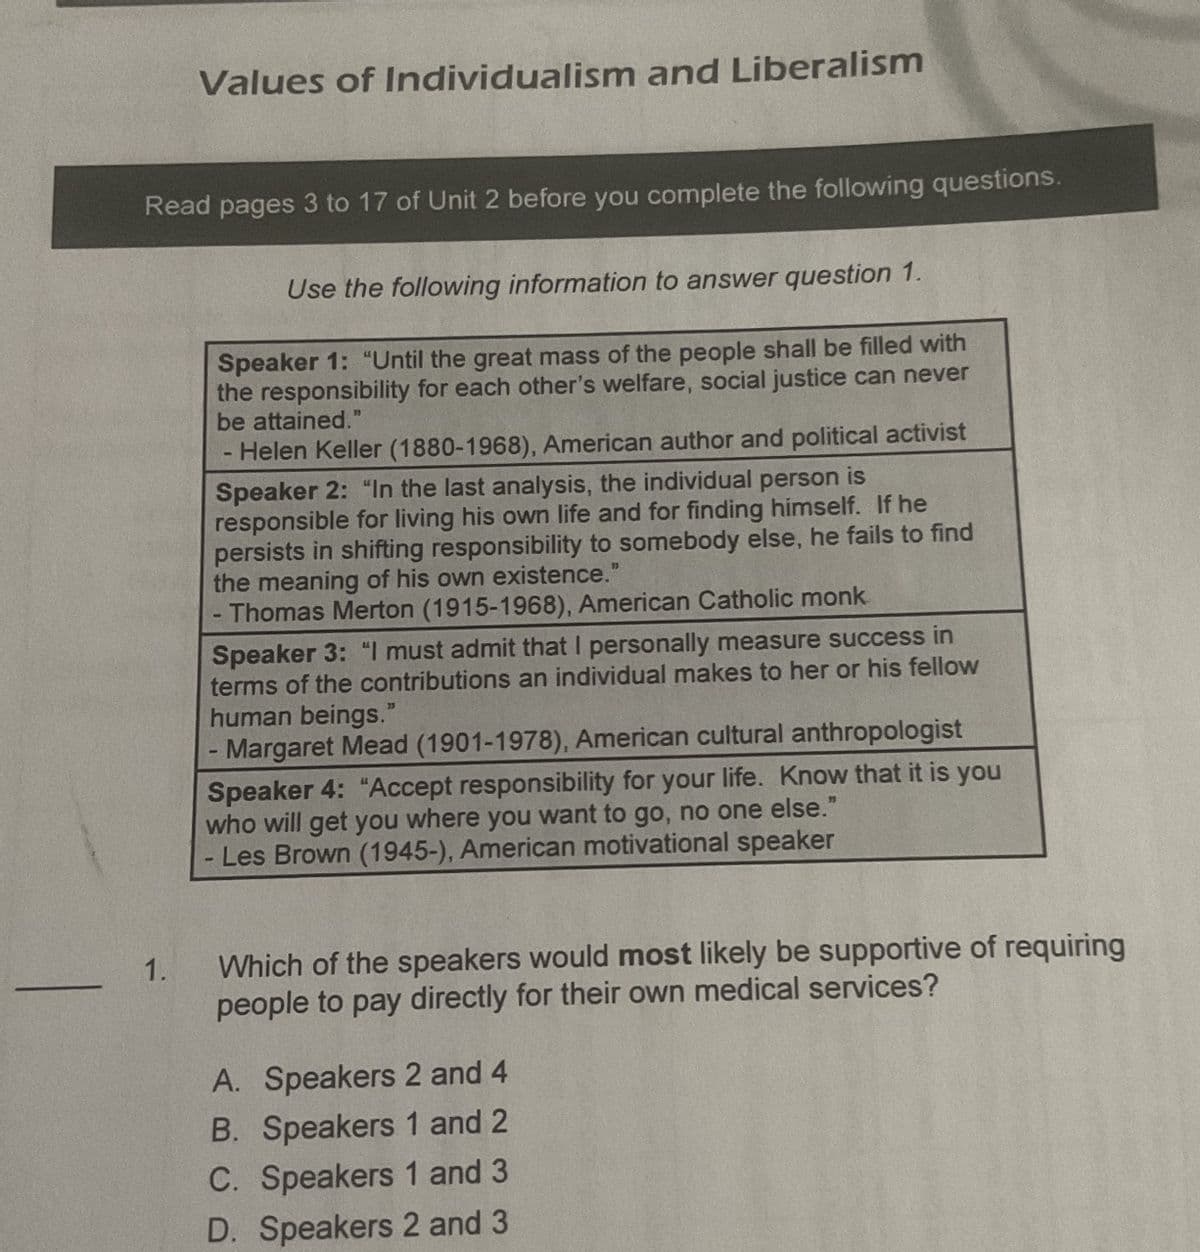 Values of Individualism and Liberalism
Read pages 3 to 17 of Unit 2 before you complete the following questions.
1.
Use the following information to answer question 1.
Speaker 1: "Until the great mass of the people shall be filled with
the responsibility for each other's welfare, social justice can never
be attained."
Helen Keller (1880-1968), American author and political activist
Speaker 2: "In the last analysis, the individual person
responsible for living his own life and for finding himself. If he
persists in shifting responsibility to somebody else, he fails to find
the meaning of his own existence."
- Thomas Merton (1915-1968), American Catholic monk
Speaker 3: "I must admit that I personally measure success in
terms of the contributions an individual makes to her or his fellow
human beings."
Margaret Mead (1901-1978), American cultural anthropologist
Speaker 4: "Accept responsibility for your life. Know that it is you
who will get you where you want to go, no one else."
Les Brown (1945-), American motivational speaker
8
S
E
Which of the speakers would most likely be supportive of requiring
people to pay directly for their own medical services?
A. Speakers 2 and 4
B. Speakers 1 and 2
C. Speakers 1 and 3
D. Speakers 2 and 3